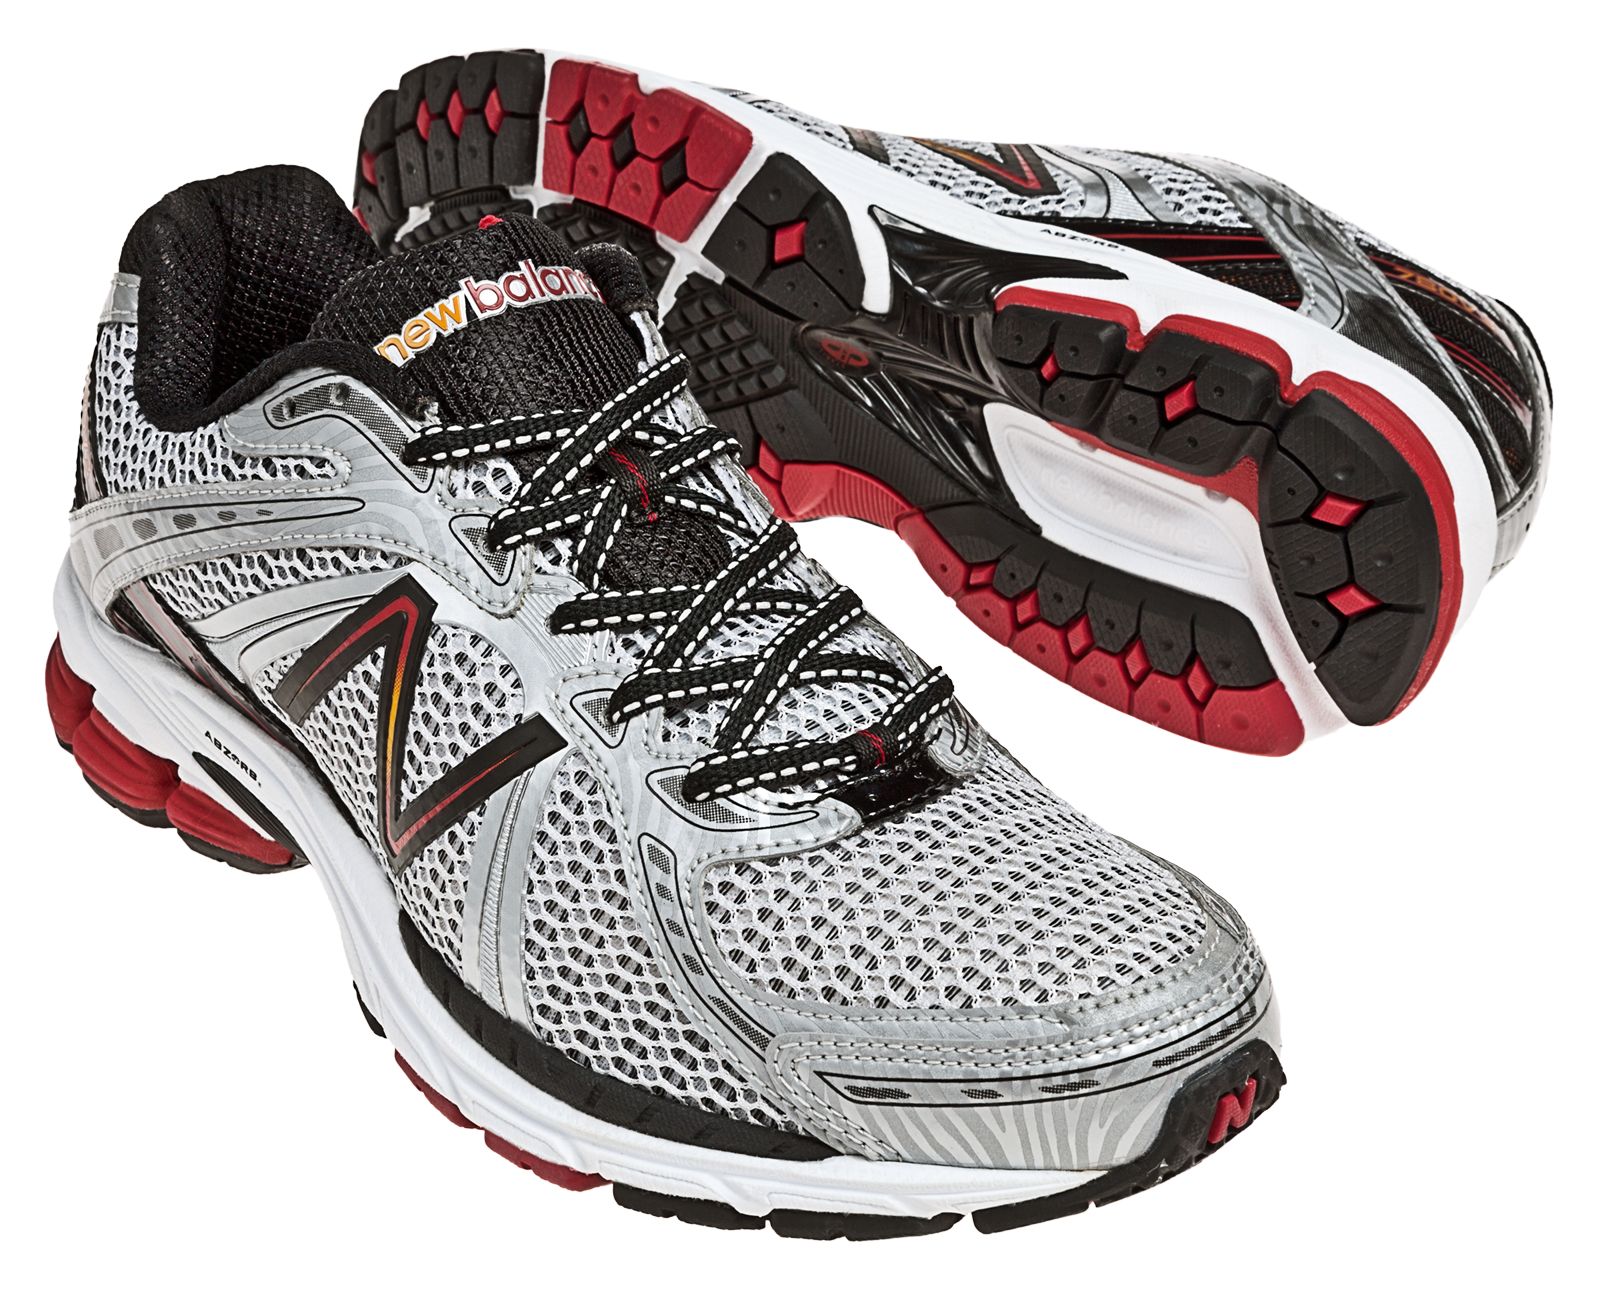 New Balance M780-V3 on Sale - Discounts Up to 25% Off on M780WR3 at Joe's New  Balance Outlet